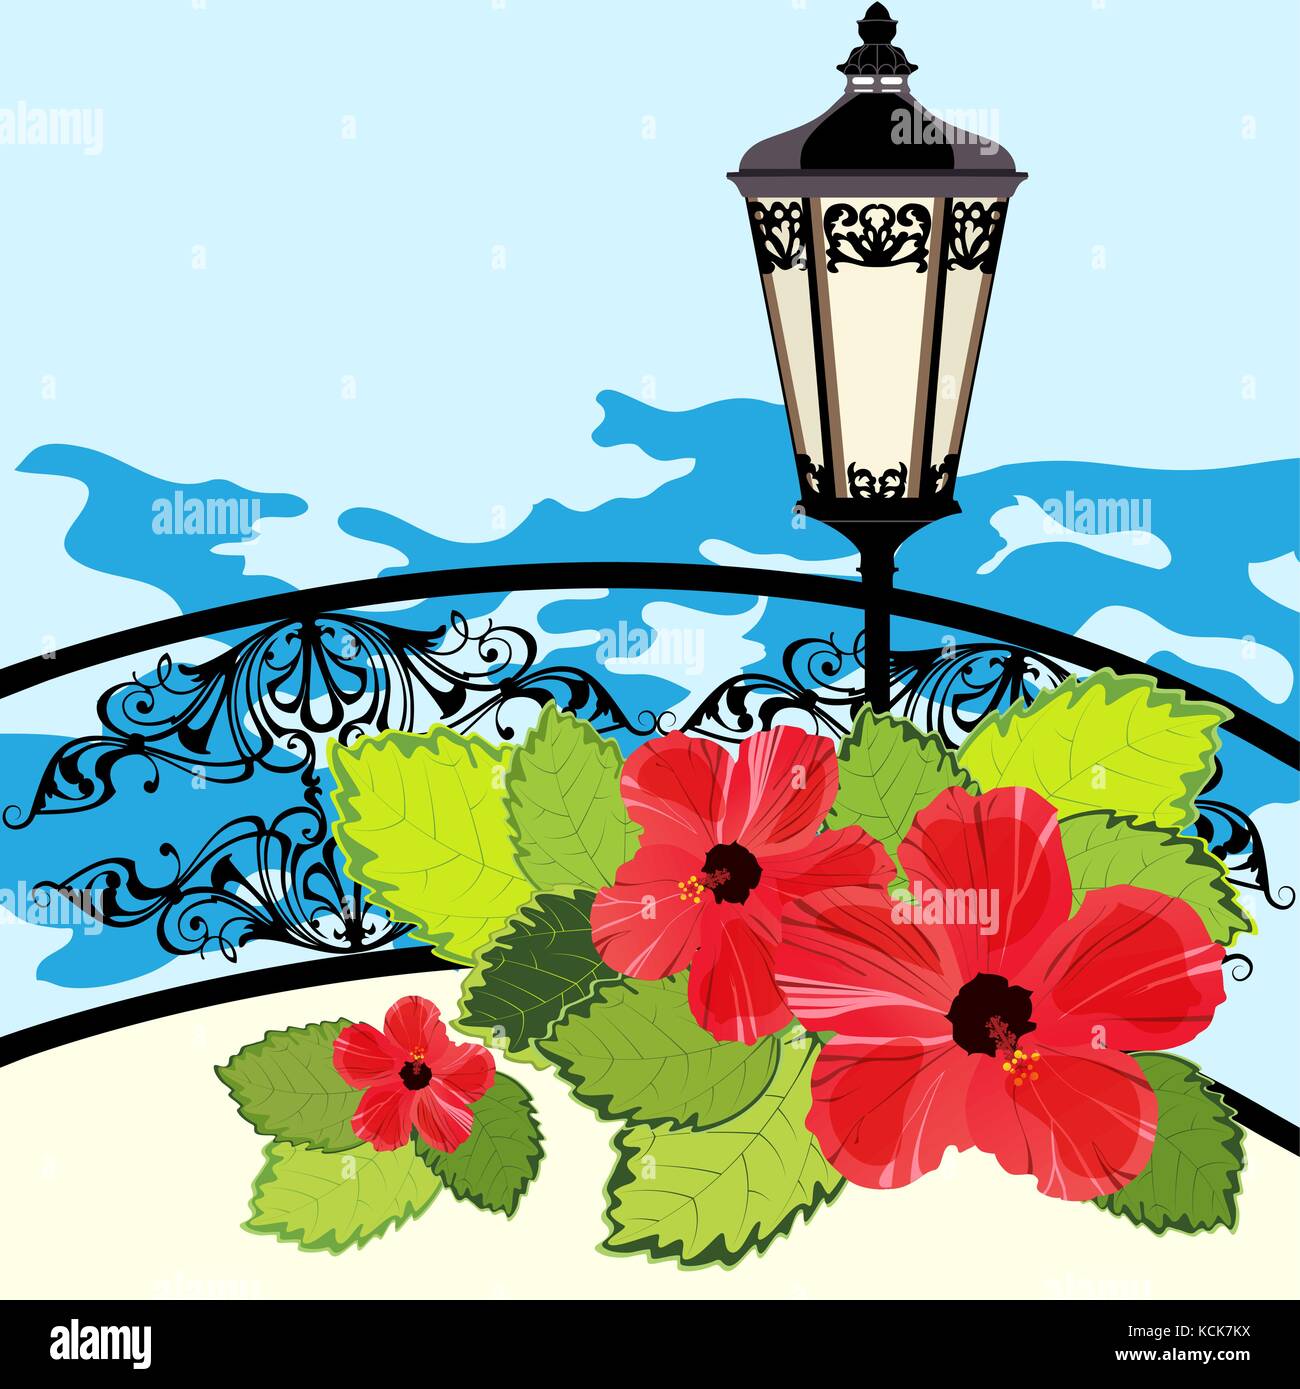 Tropical coastline with lantern, fence and flowers, vector illustration Stock Vector